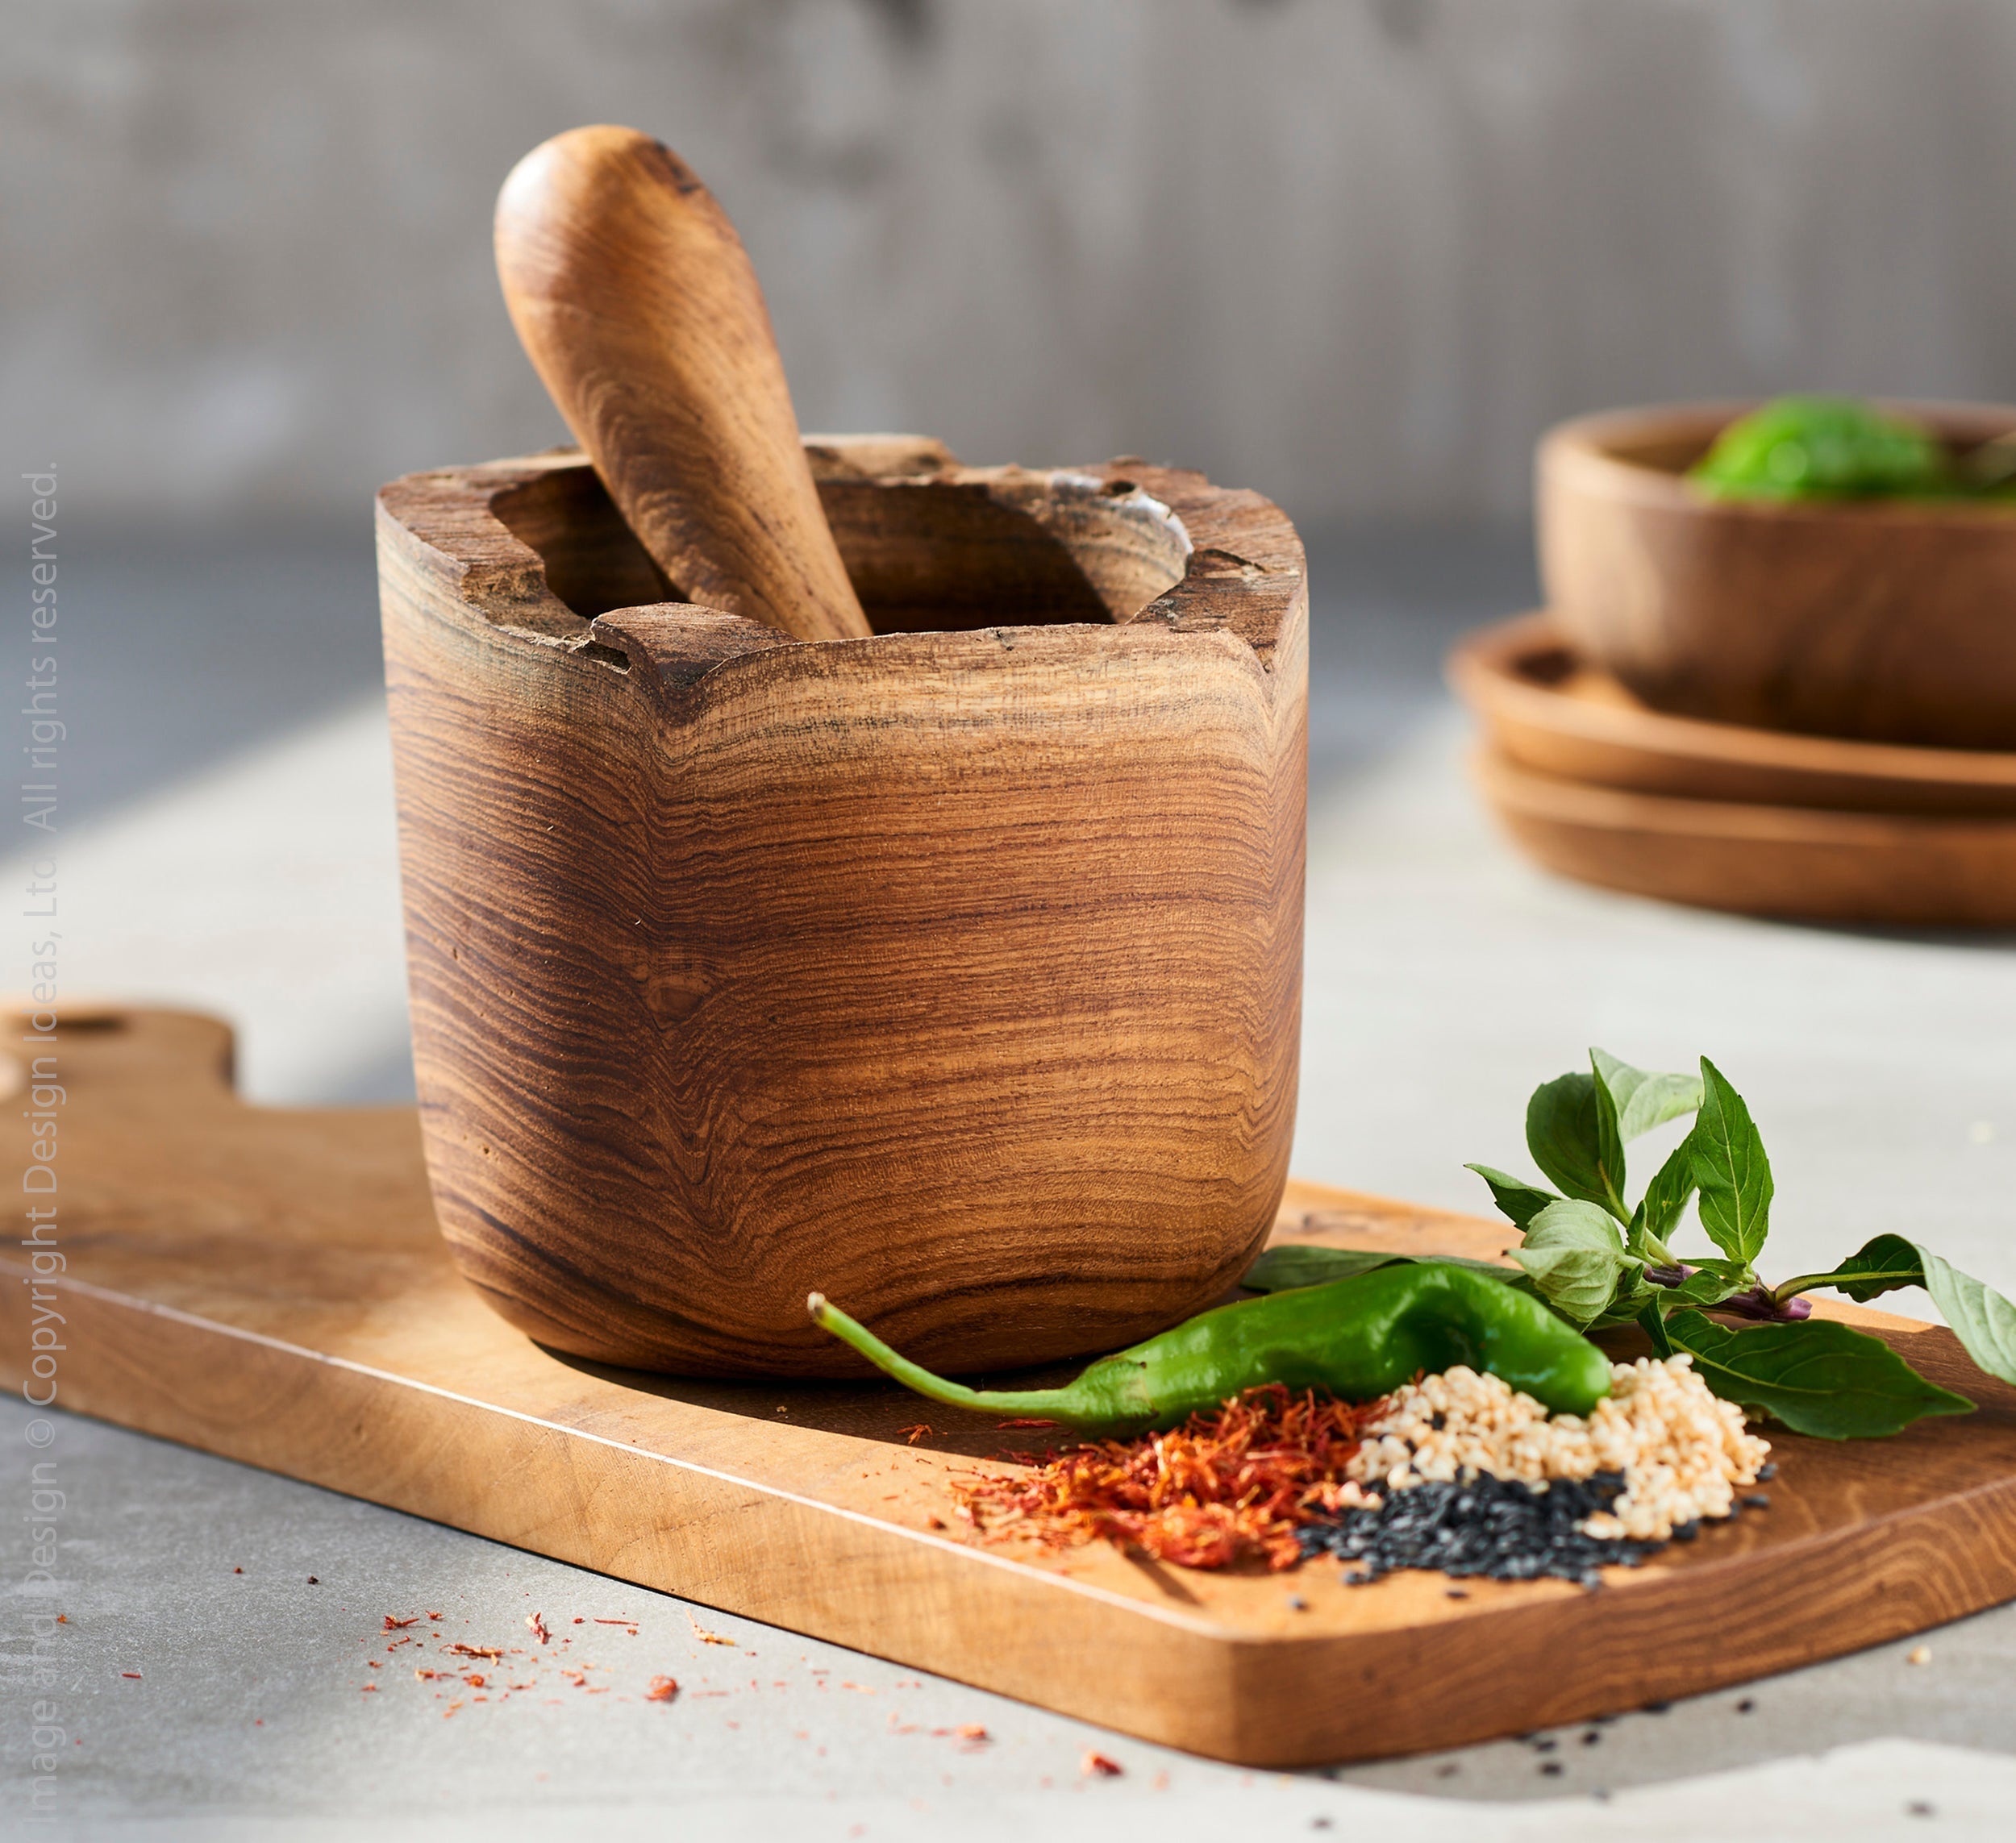 Takara Teak Root Mortar & Pestle Black Color | Image 2 | From the Takara Collection | Elegantly handmade with natural teak root for long lasting use | This bowl is sustainably sourced | Available in natural color | texxture home